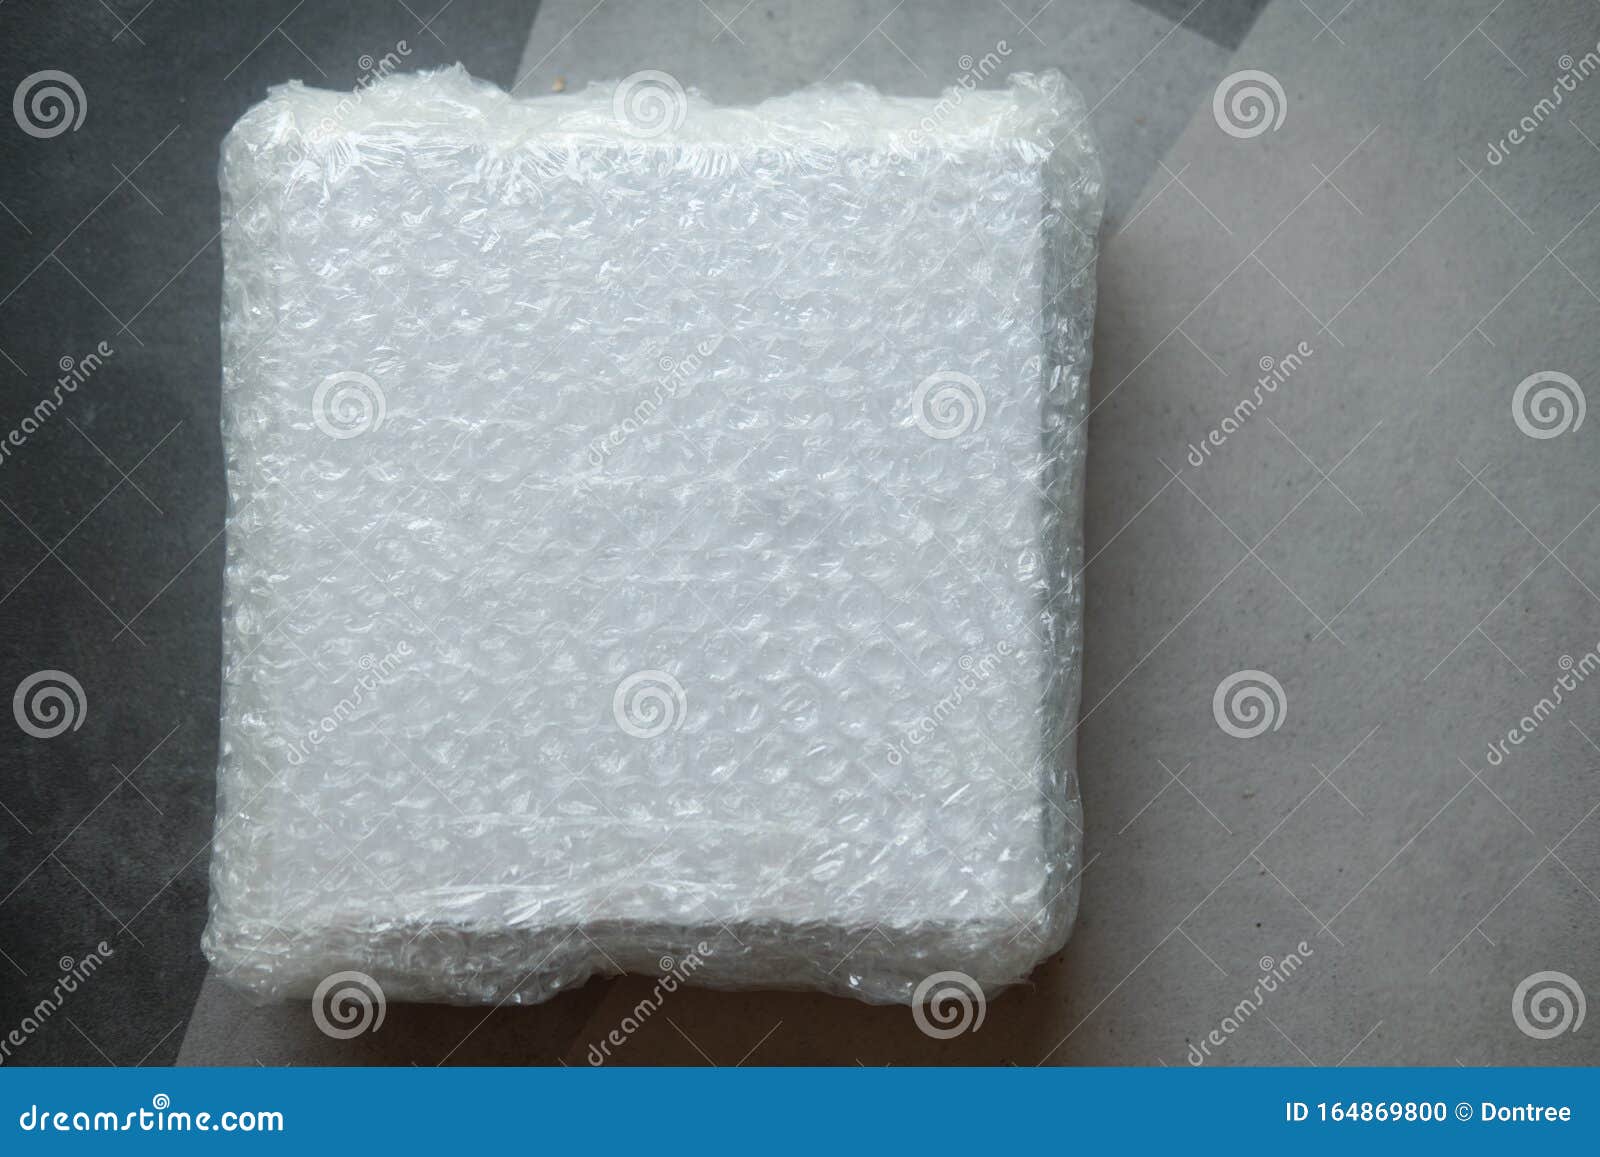 Air bubble wrap is one of the most popular protect